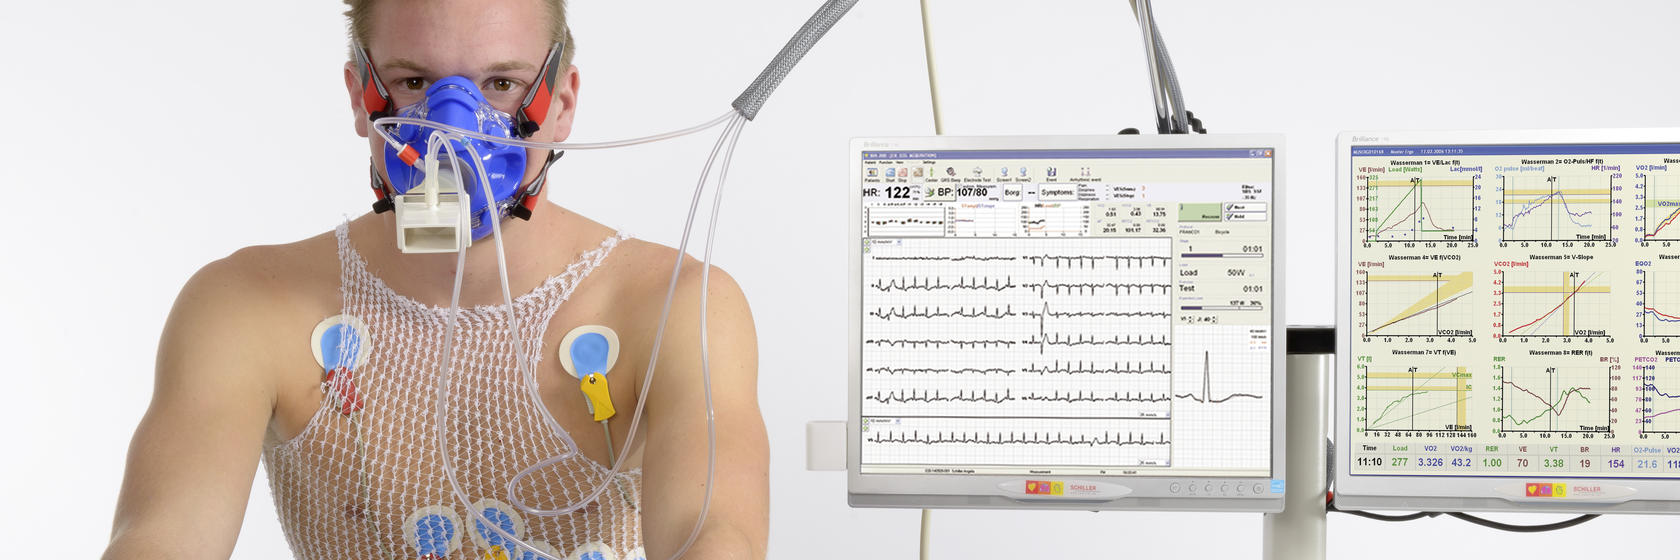 SCHILLER is a world-leading manufacturer and supplier of devices for cardiopulmonary diagnostics, defibrillation and patient monitoring as well as software solutions for the medical industry. ​